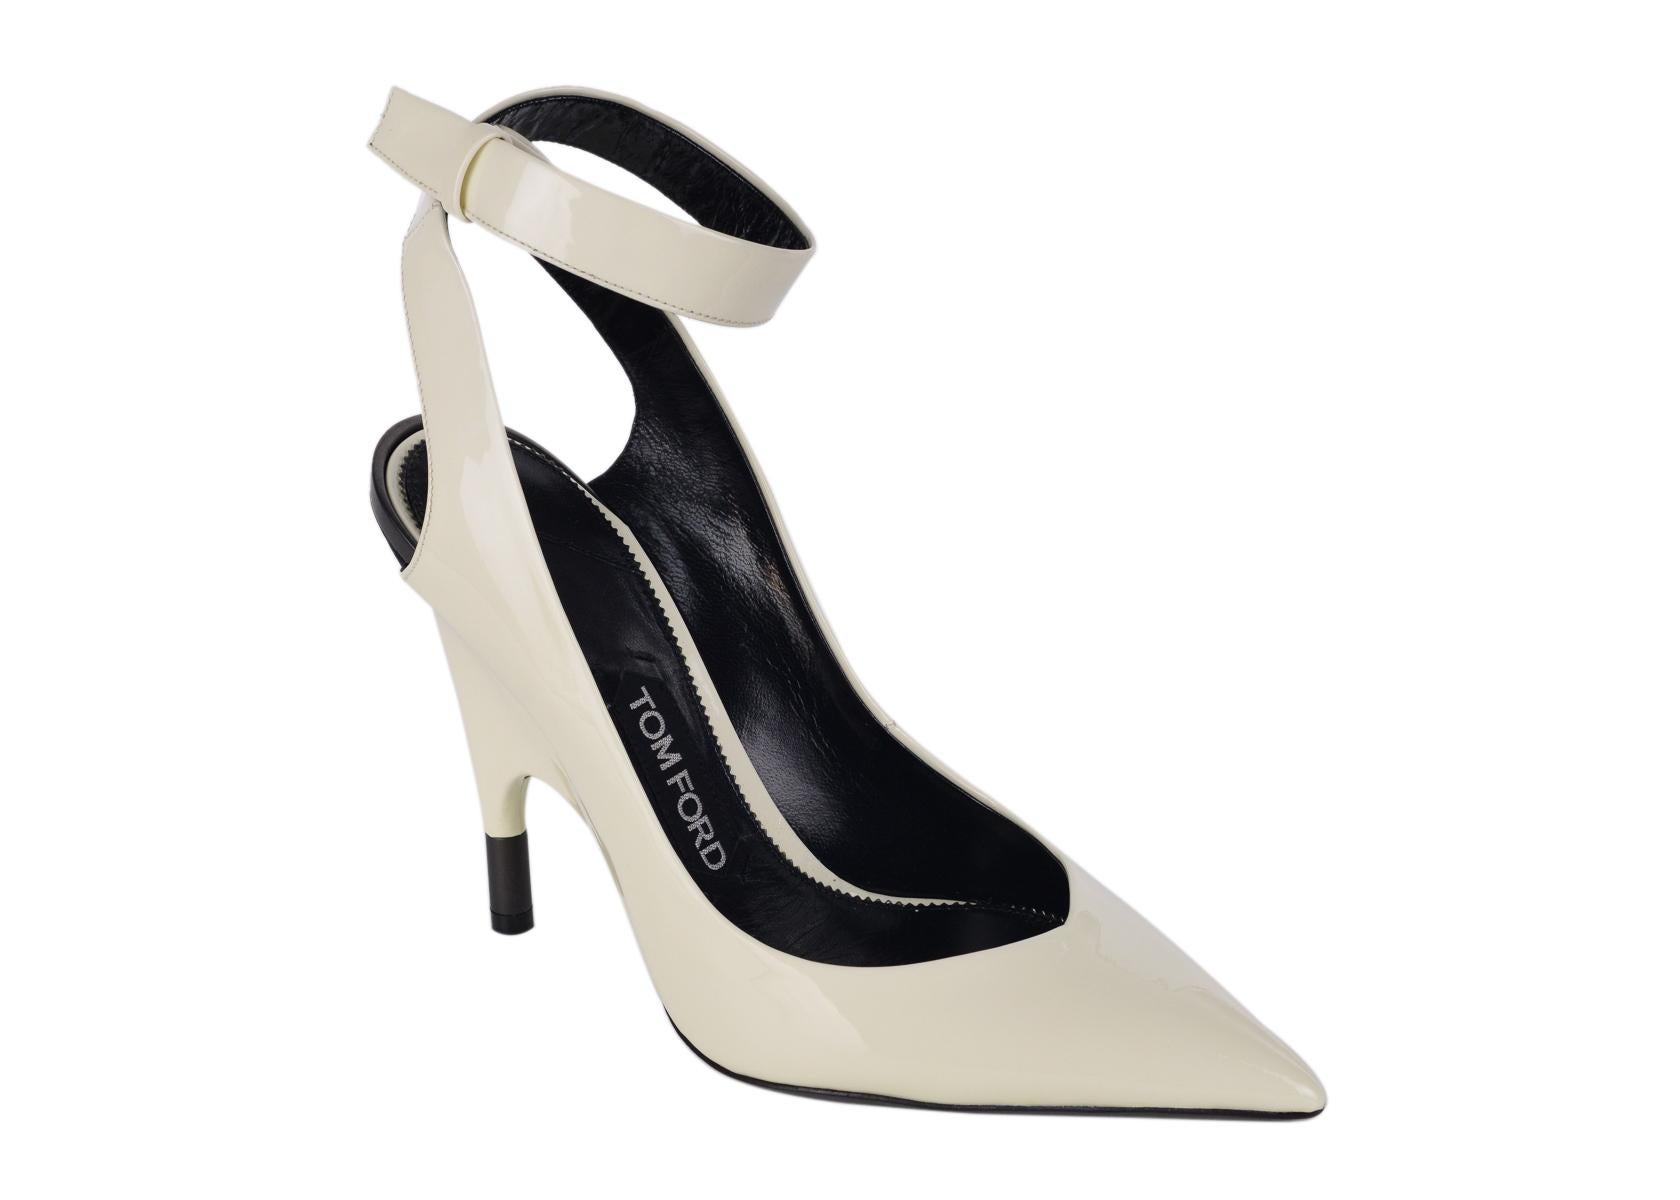 Tom Ford Womens White Patent Leather Ankle Covered Heel Pumps IT38.5/US8.5 im Zustand „Neu“ im Angebot in Brooklyn, NY